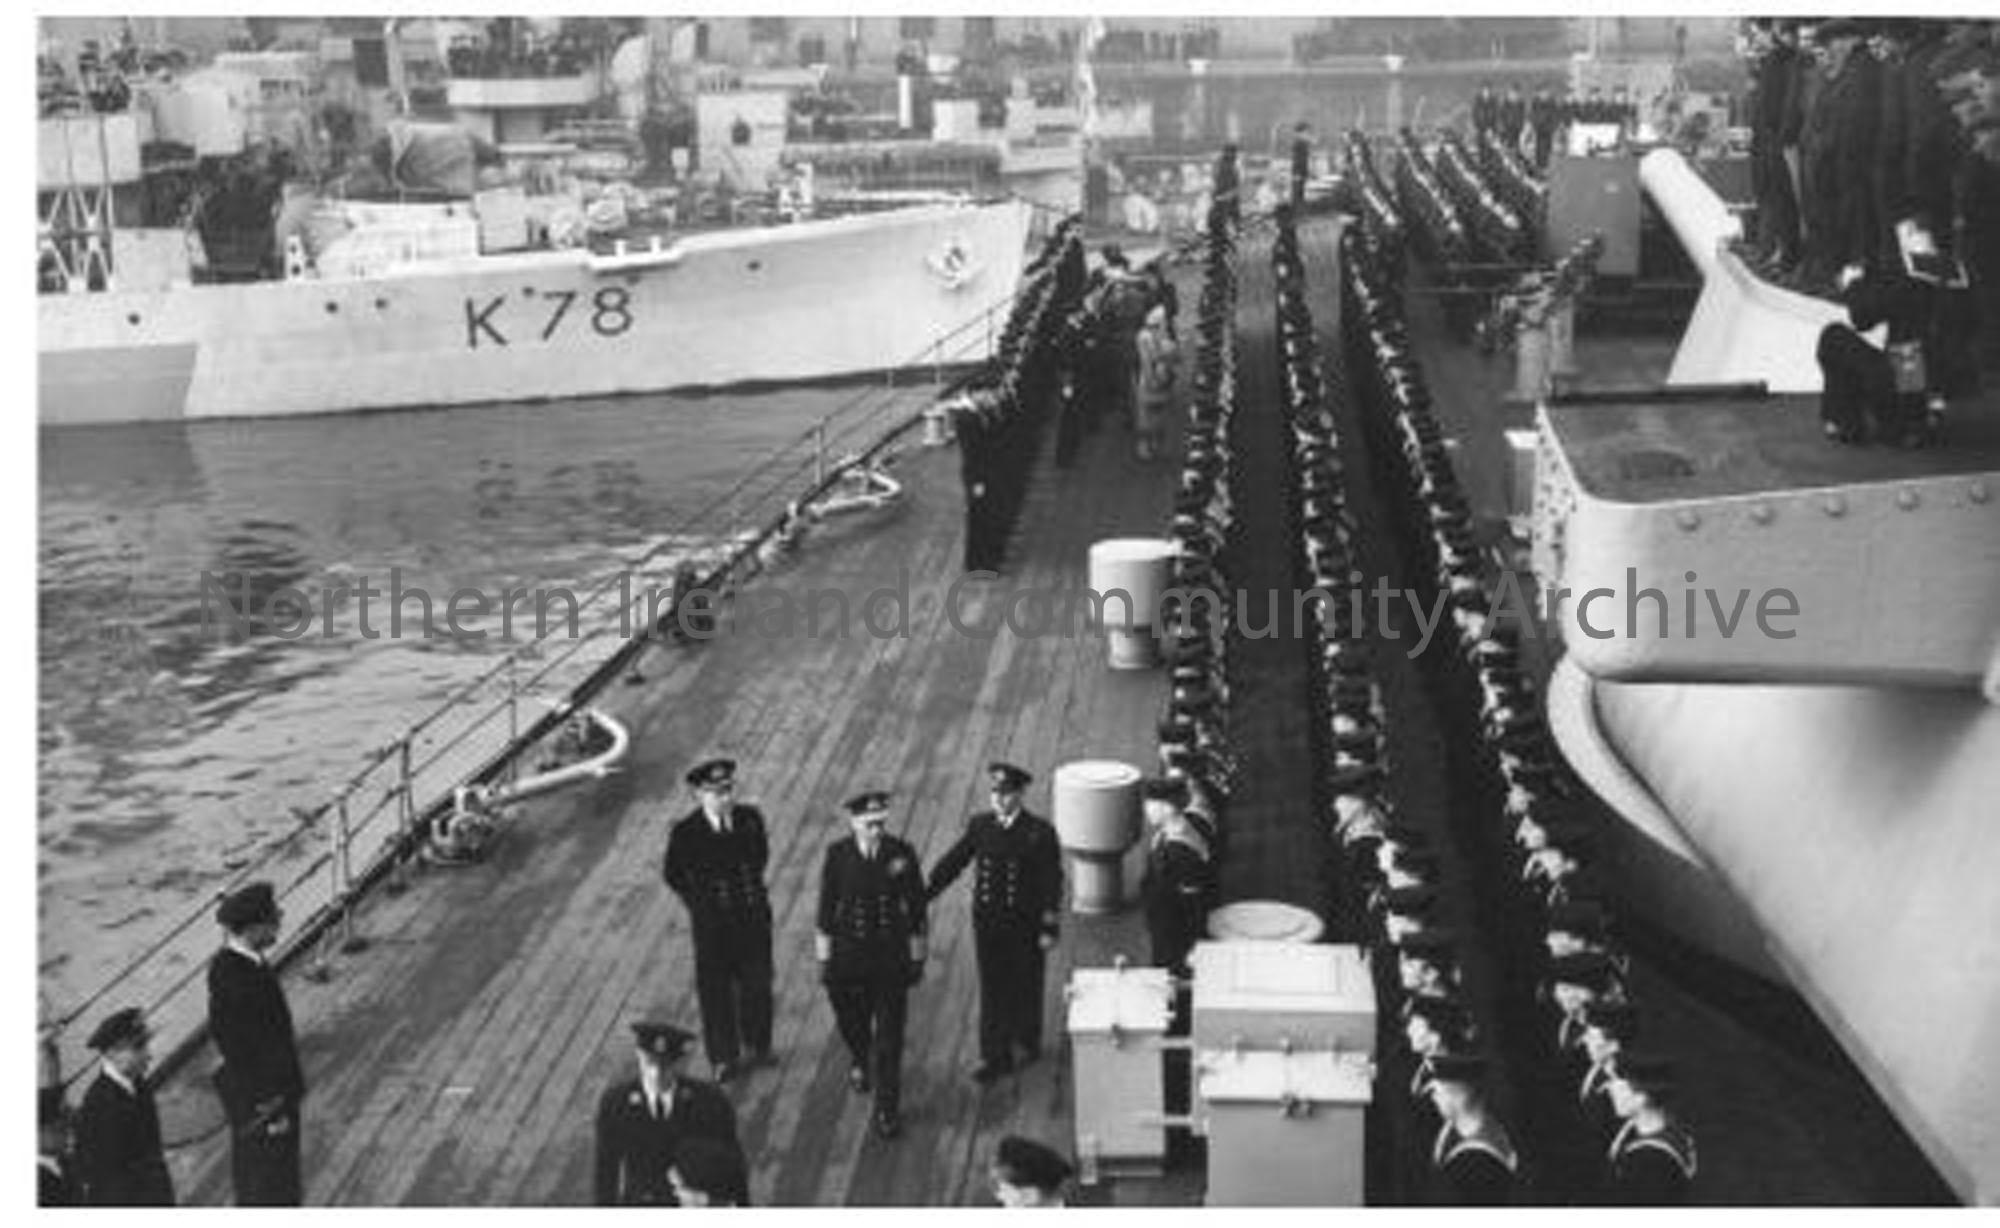 HMS Rhododendron
K 78  
Ship number 1071
Launched 2 Sep, 1940  
Commissioned 18 Oct, 1940  
 (2115)